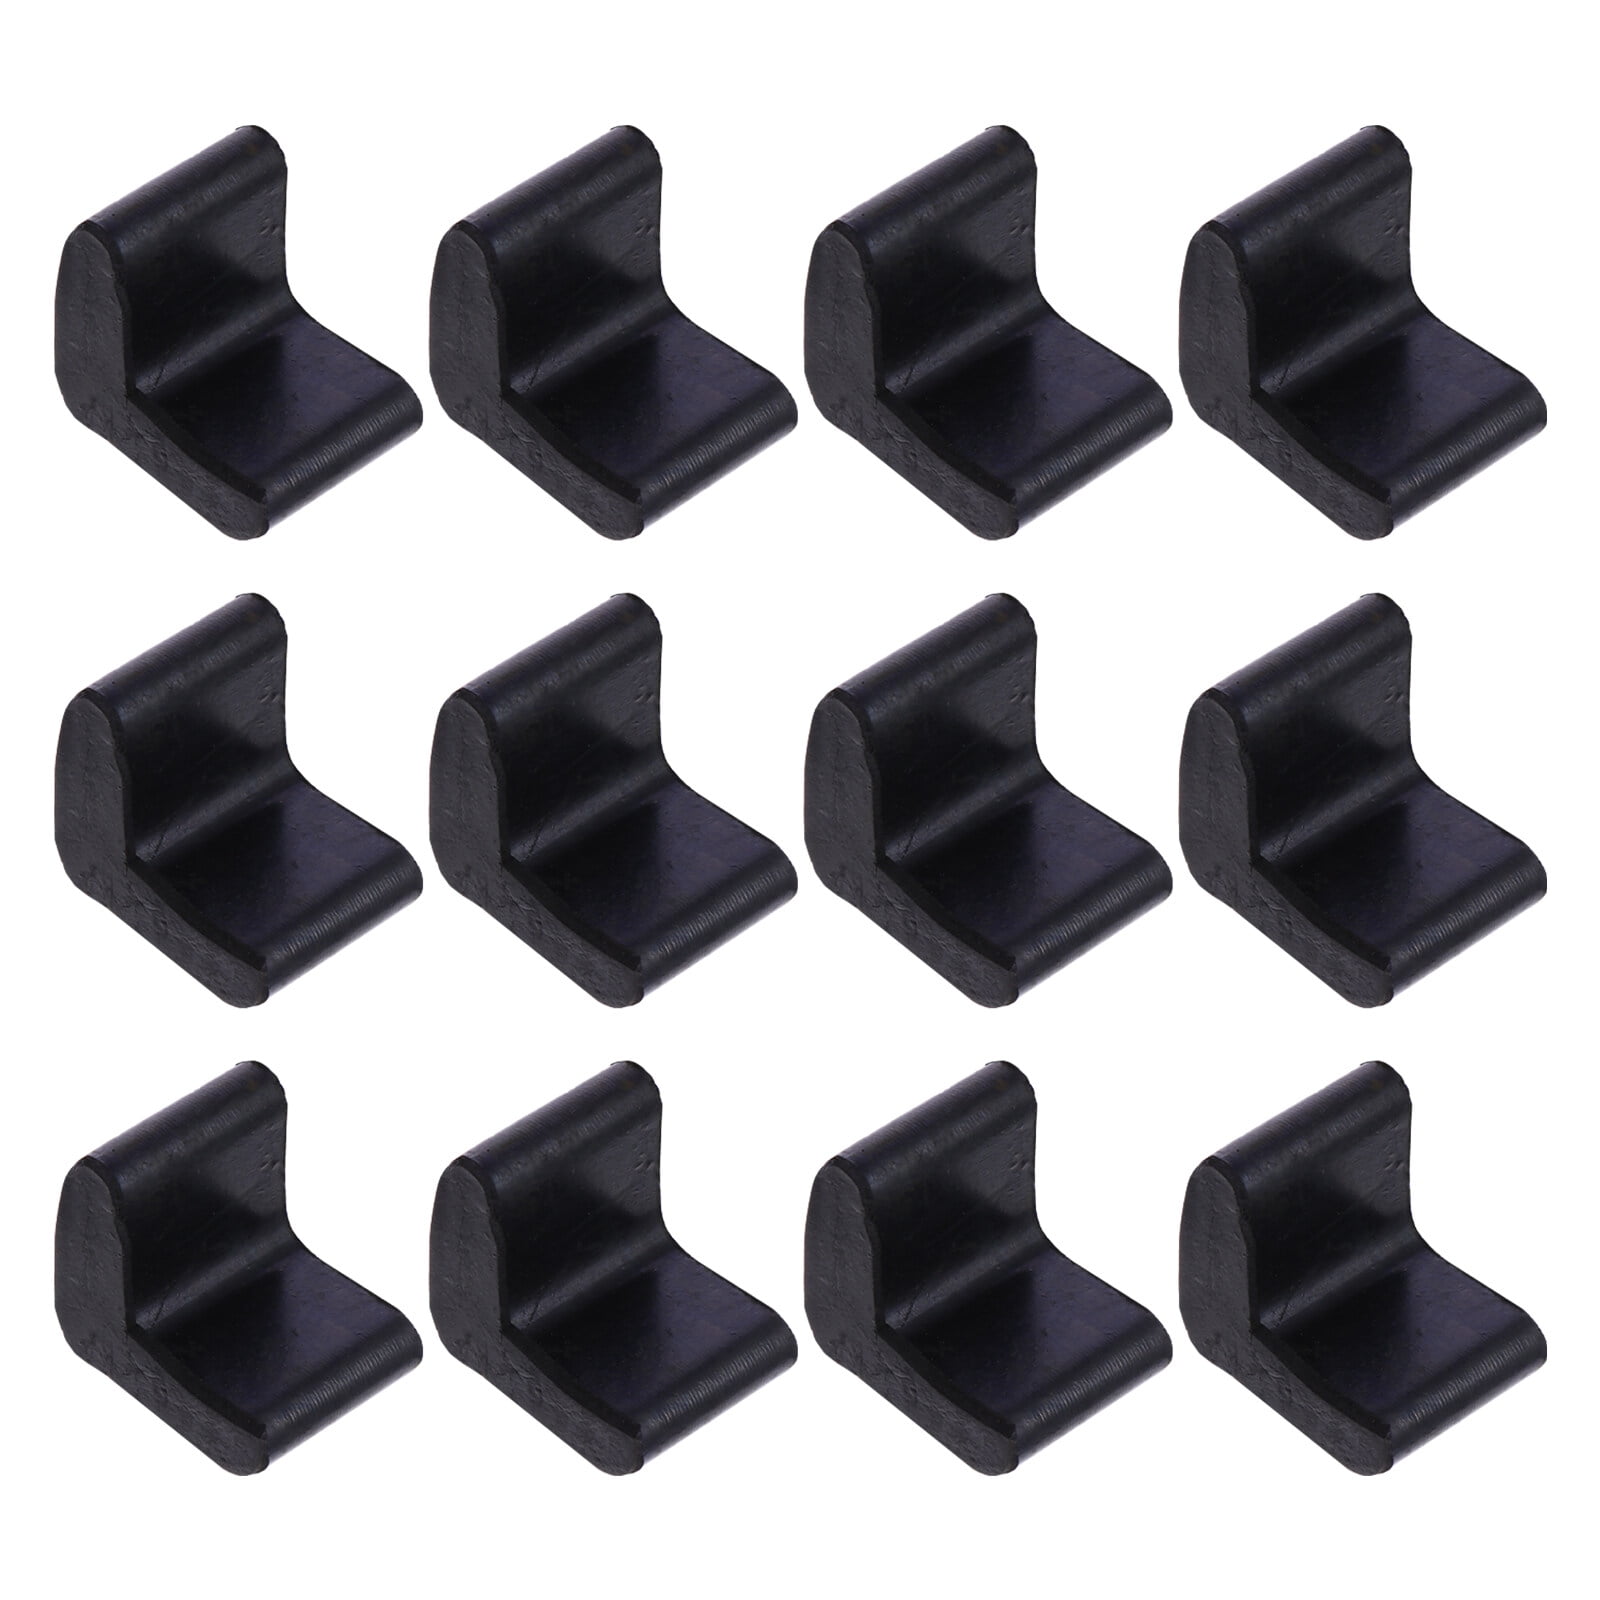 30pcs L Shaped Rubber Angle Iron Caps Furniture Angle Pads Bed Steel ...